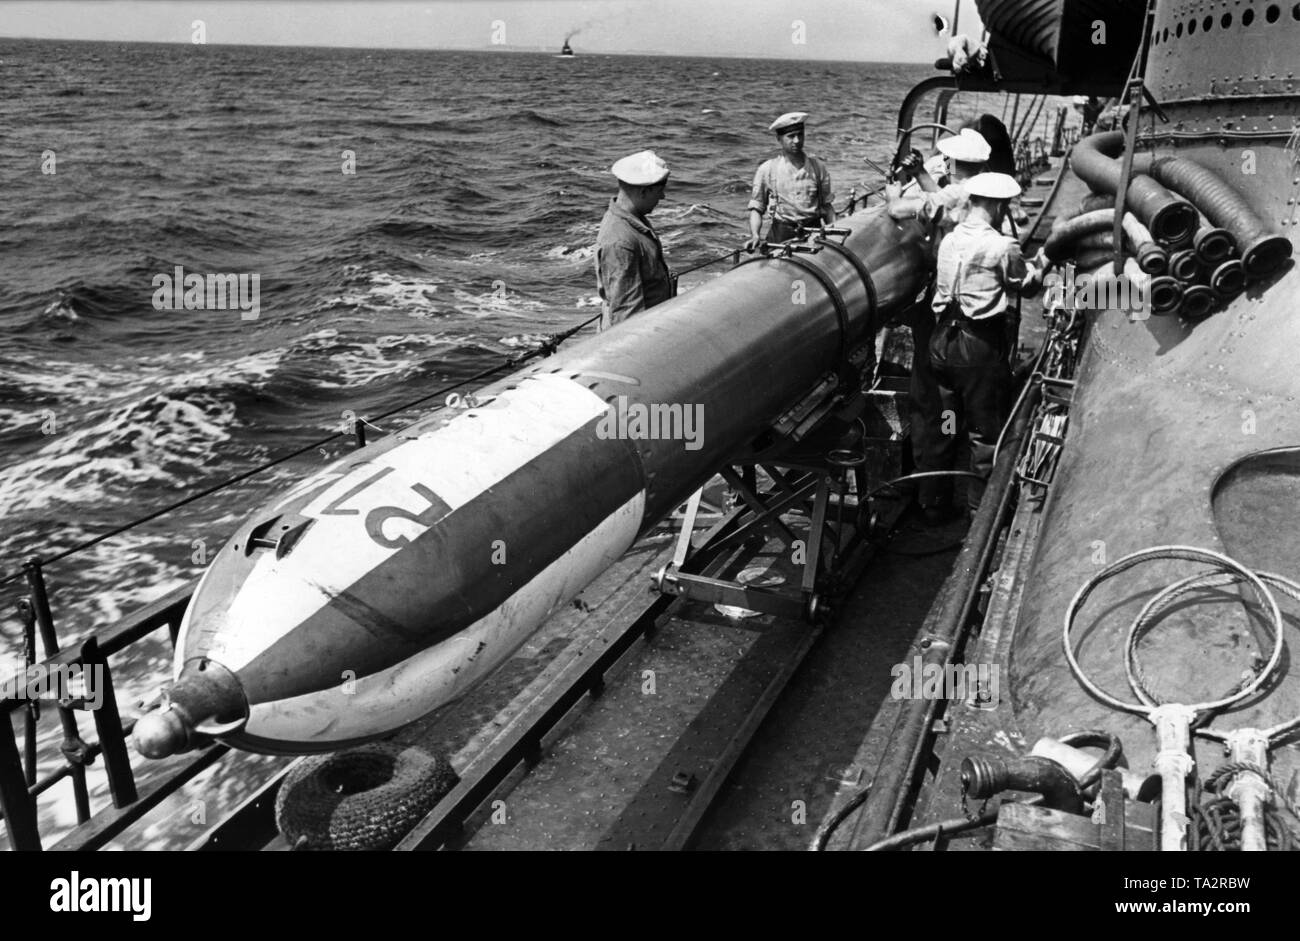 The picture shows members of the crew of a German destroyer of the Kriegsmarine (Navy) repairing a practice torpedo as it was used at that time by the Kriegsmarine during maneuvers and target practice. Stock Photo